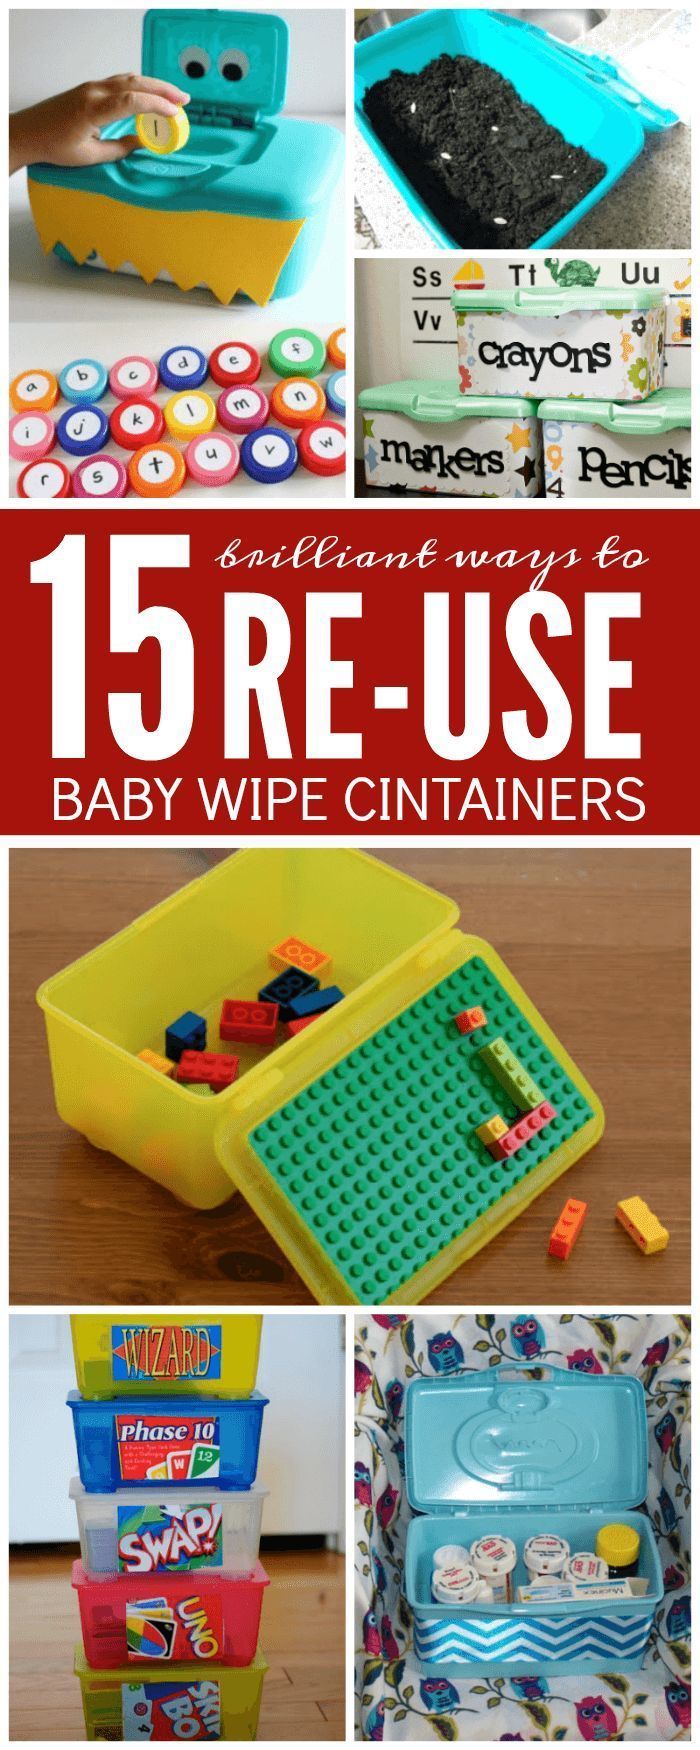 15 Surprising Ways to Re-Use Baby Wipe Containers - 15 Surprising Ways to Re-Use Baby Wipe Containers -   17 diy Baby box ideas